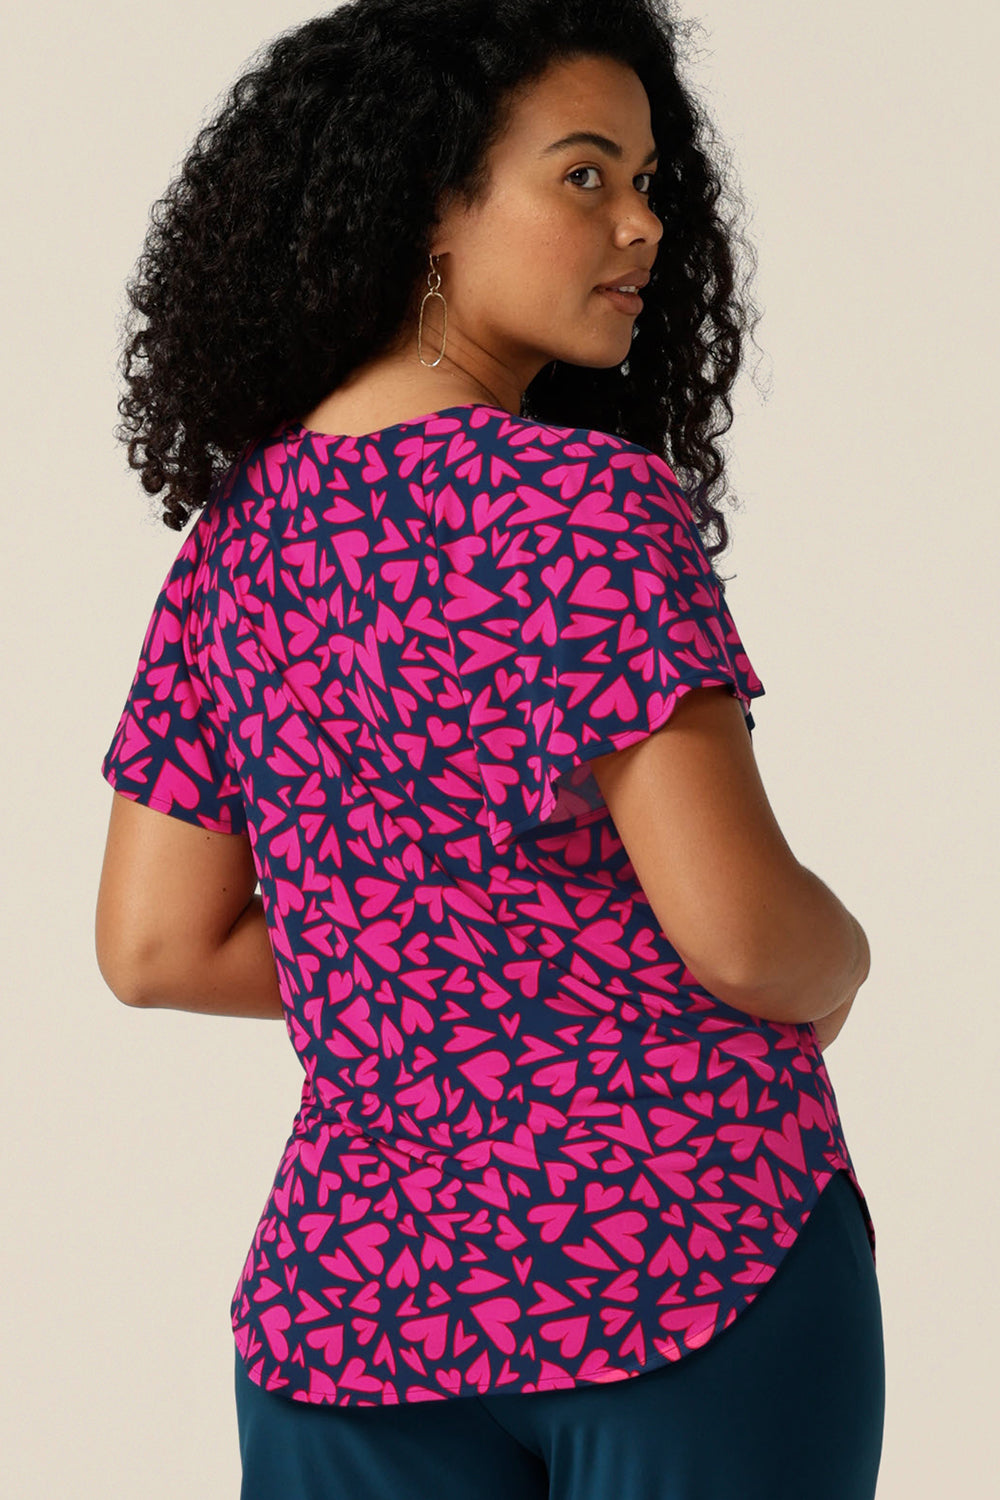 A size 12 curvy woman wears a V-neck short sleeve jersey top printed with pink hearts and designed and made in Australia.